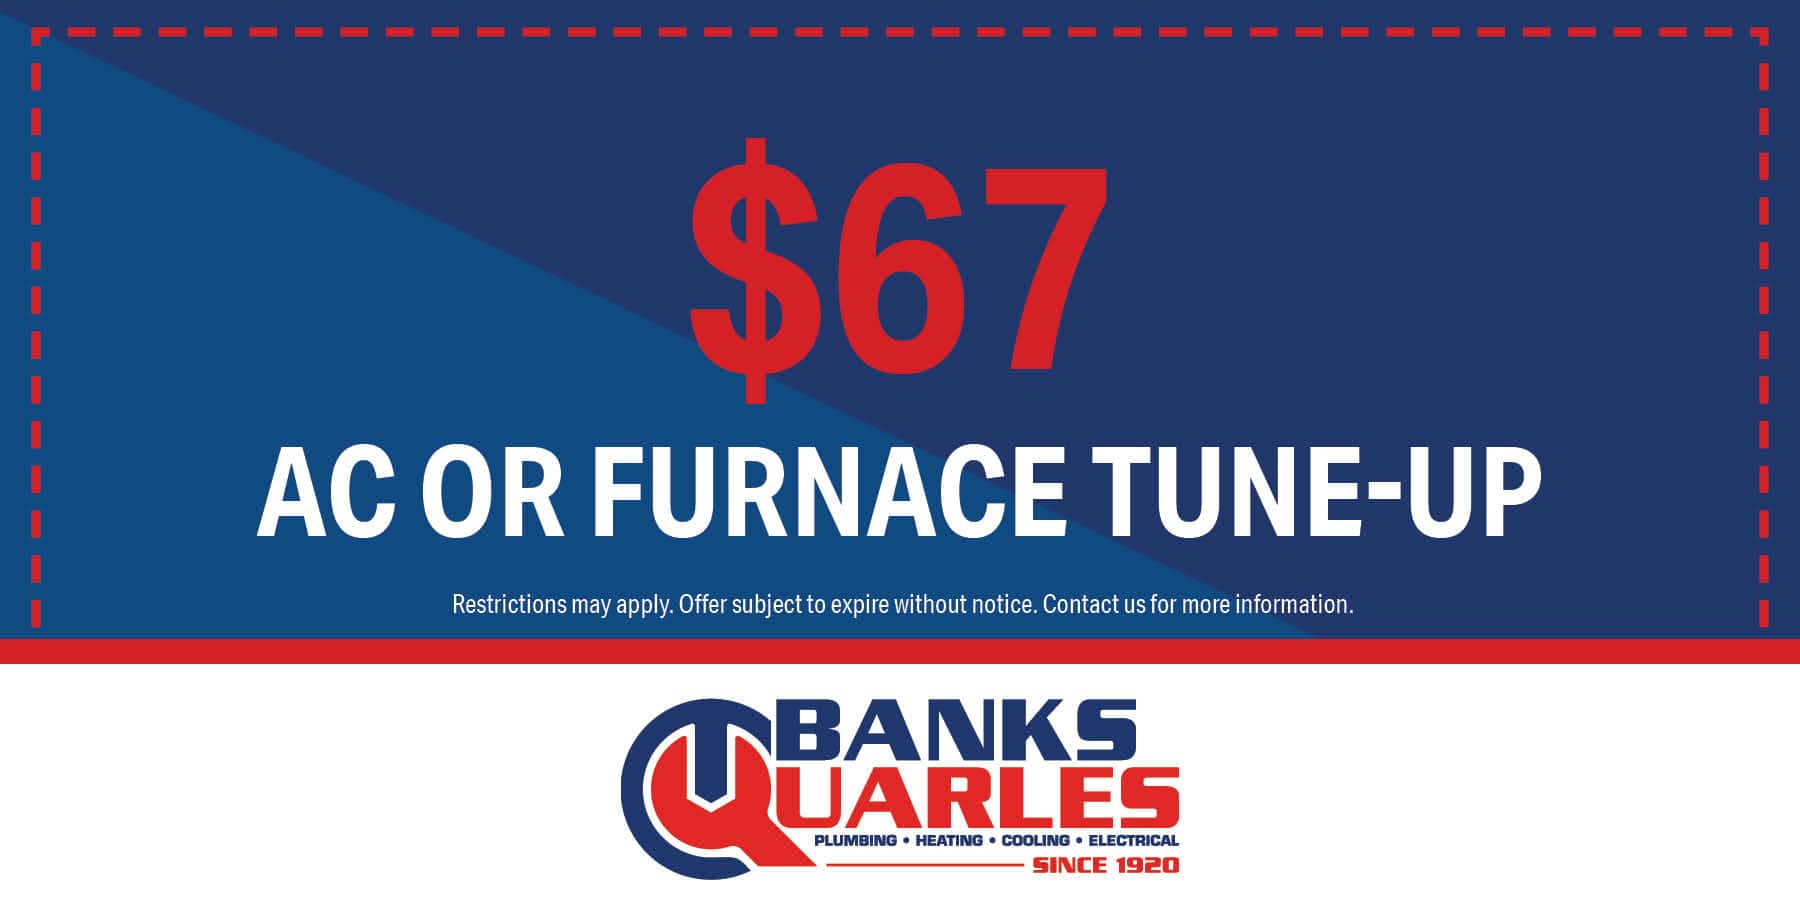 $67 AC or furnace tune-up. Offer subject to expire without warning. Contact us for details.